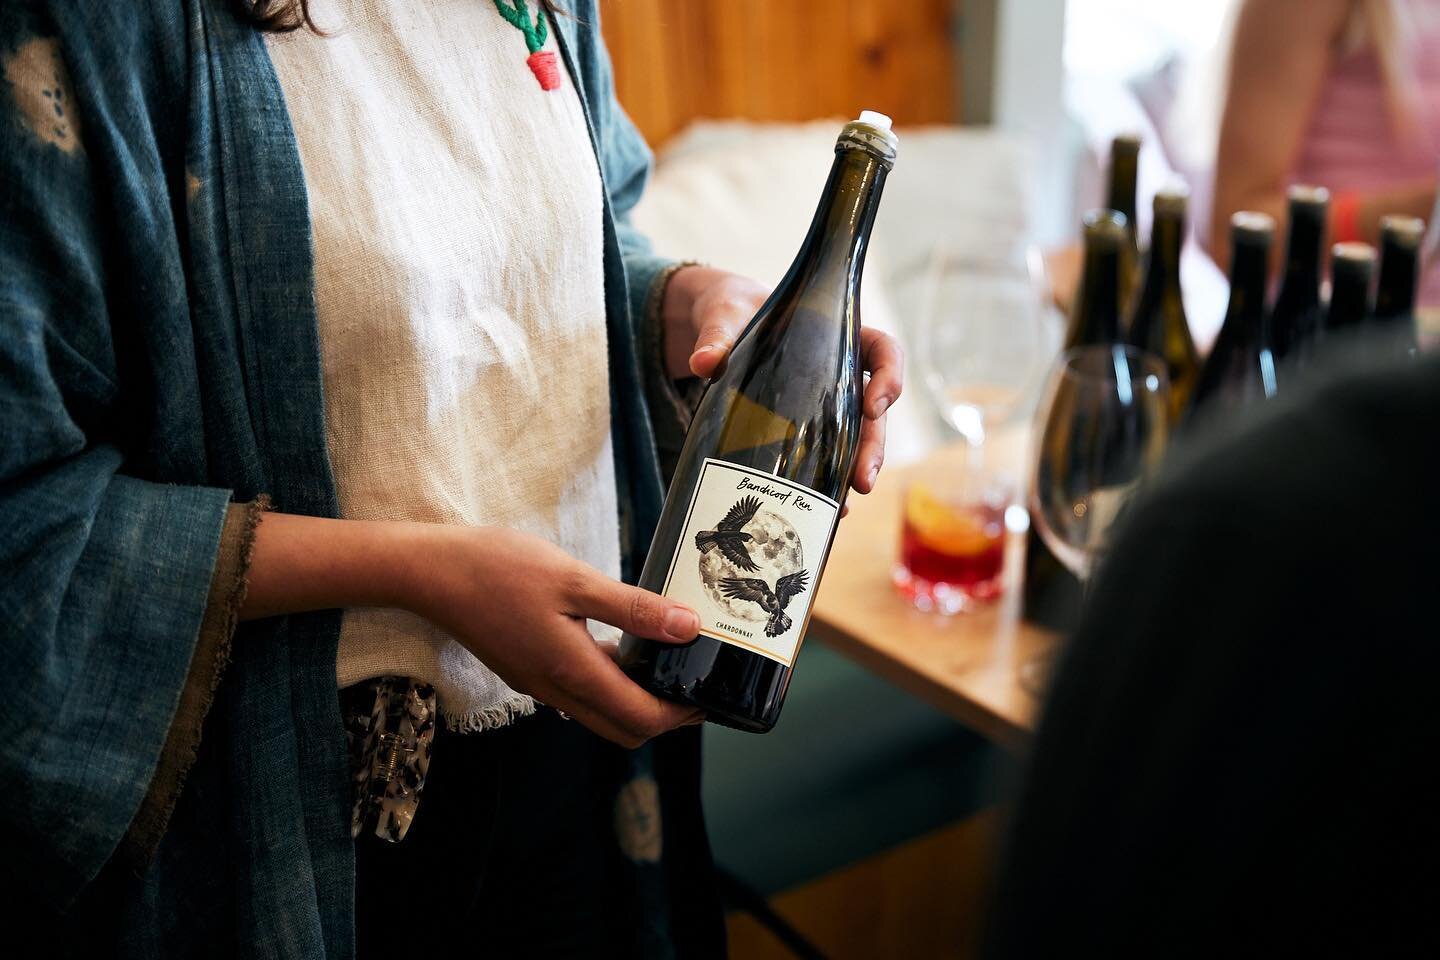 A few snaps from the last @thefruitfulpursuit event in Adelaide. We had a such a great time, pouring new wines and having great chats in a relaxed environment.

And the good news is they&rsquo;re bringing the party to Melbourne, this time next week -